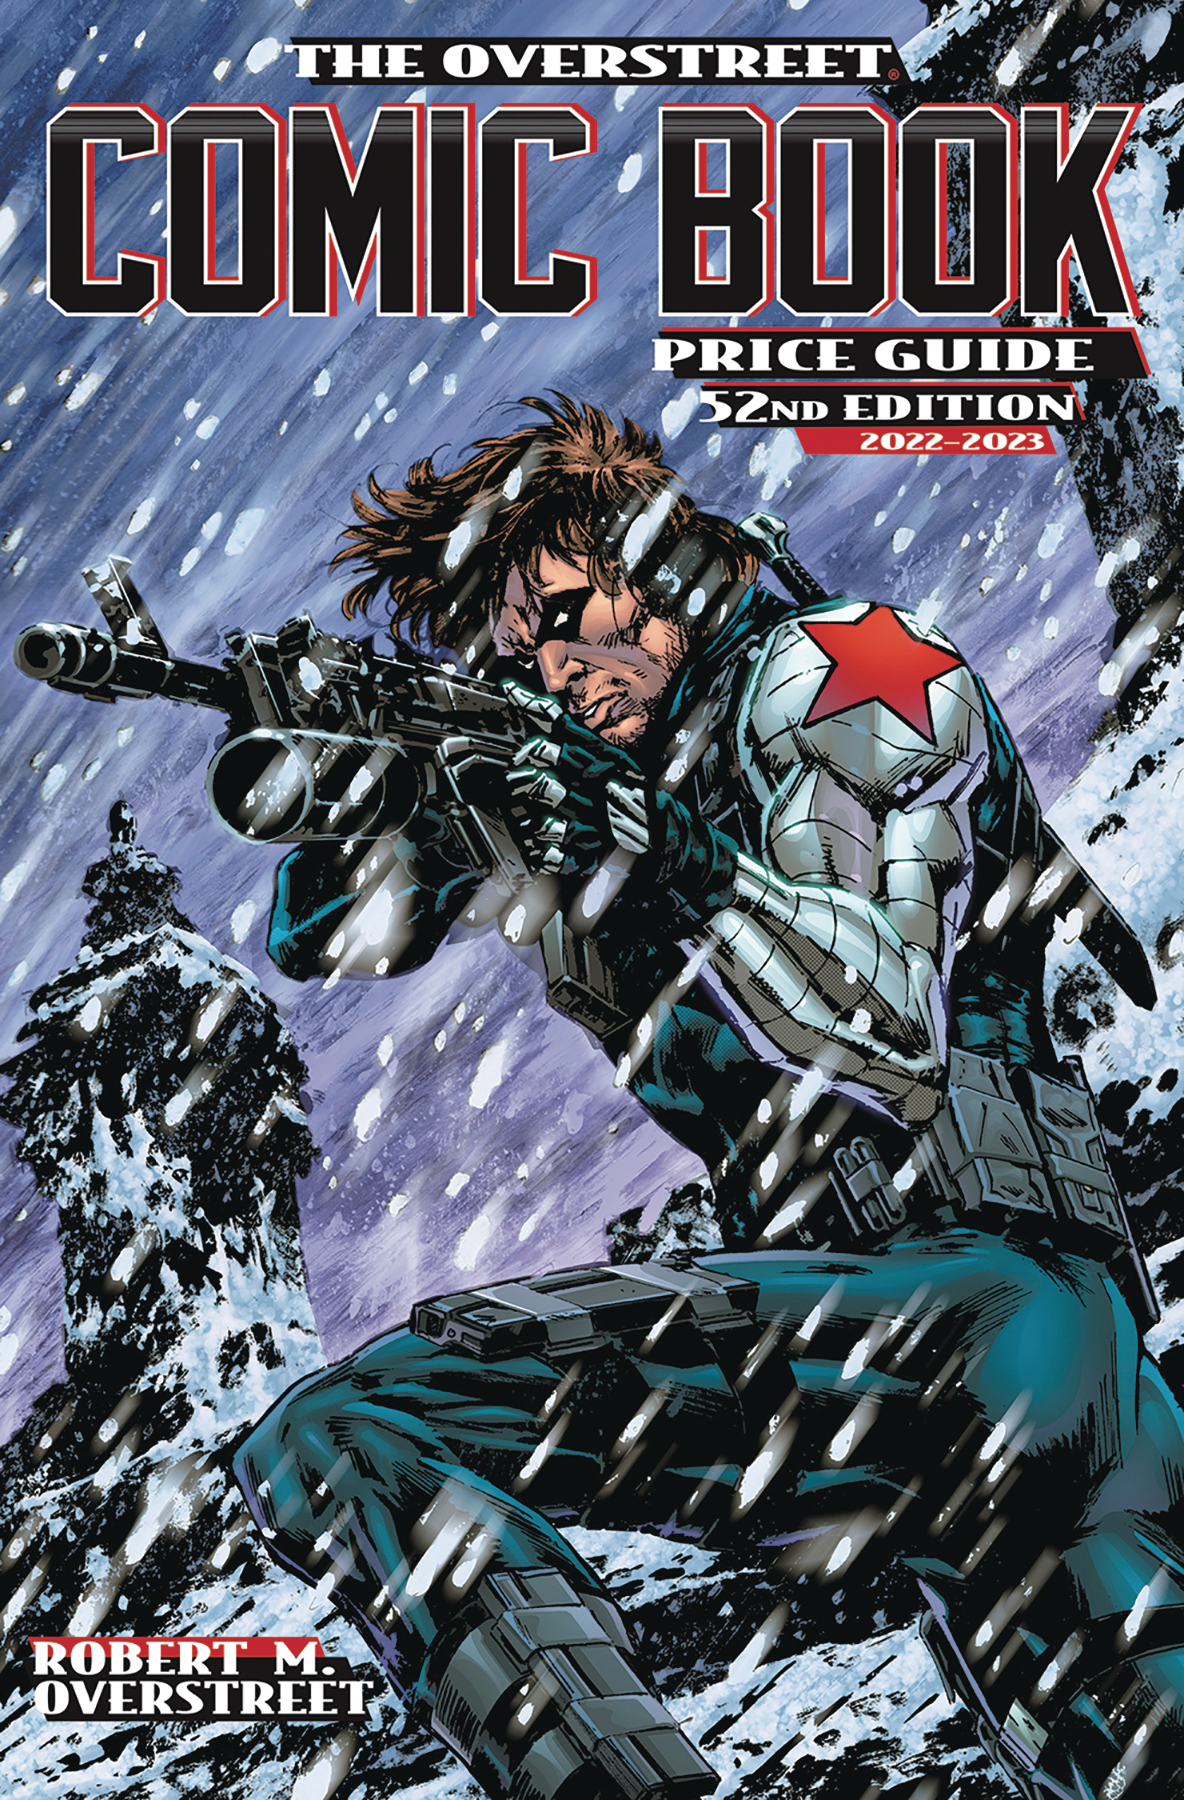 Overstreet Comic Book Price Guide Volume 52 Winter Soldier